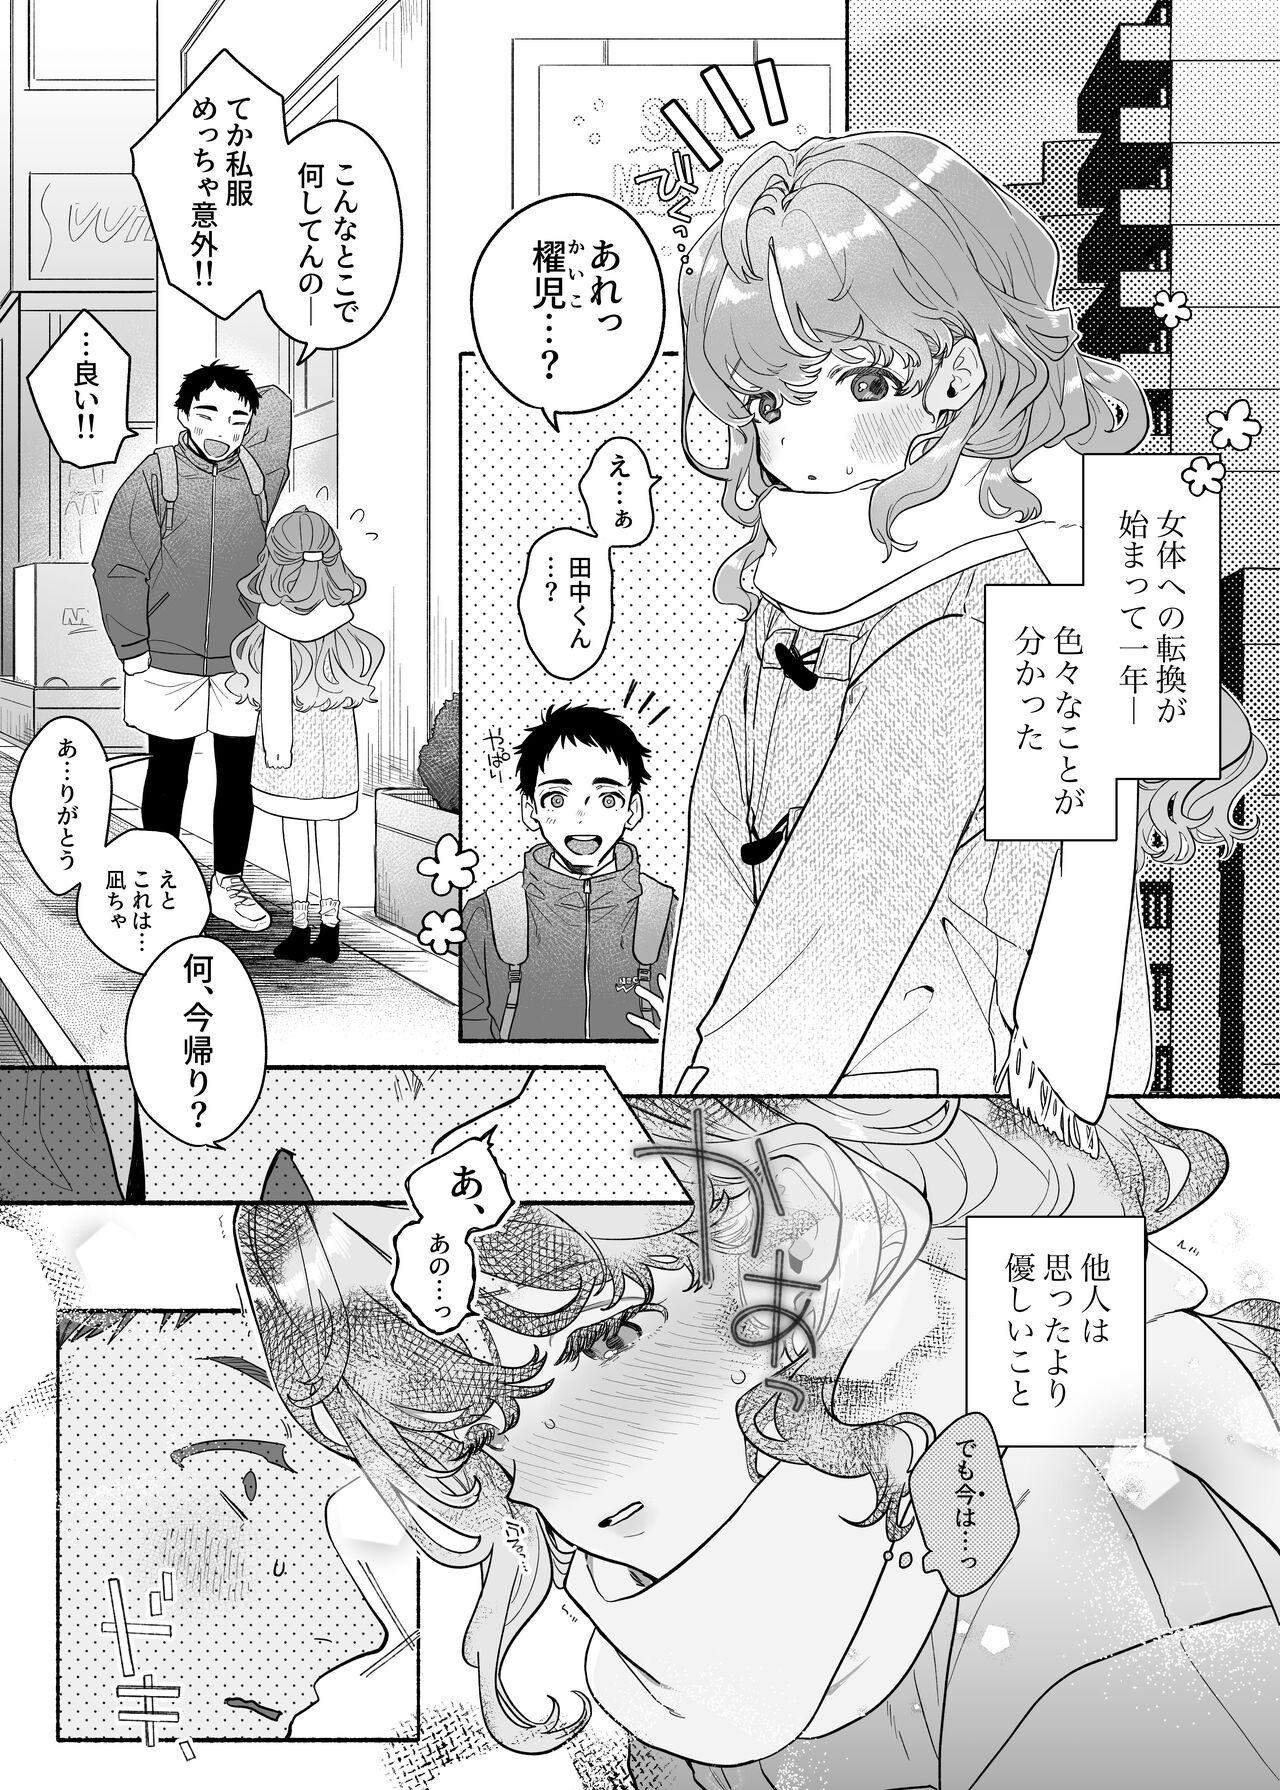 Creampies 執着は孵化にて歪むる三角形 ふたつめ - Original Hardcorend - Page 7